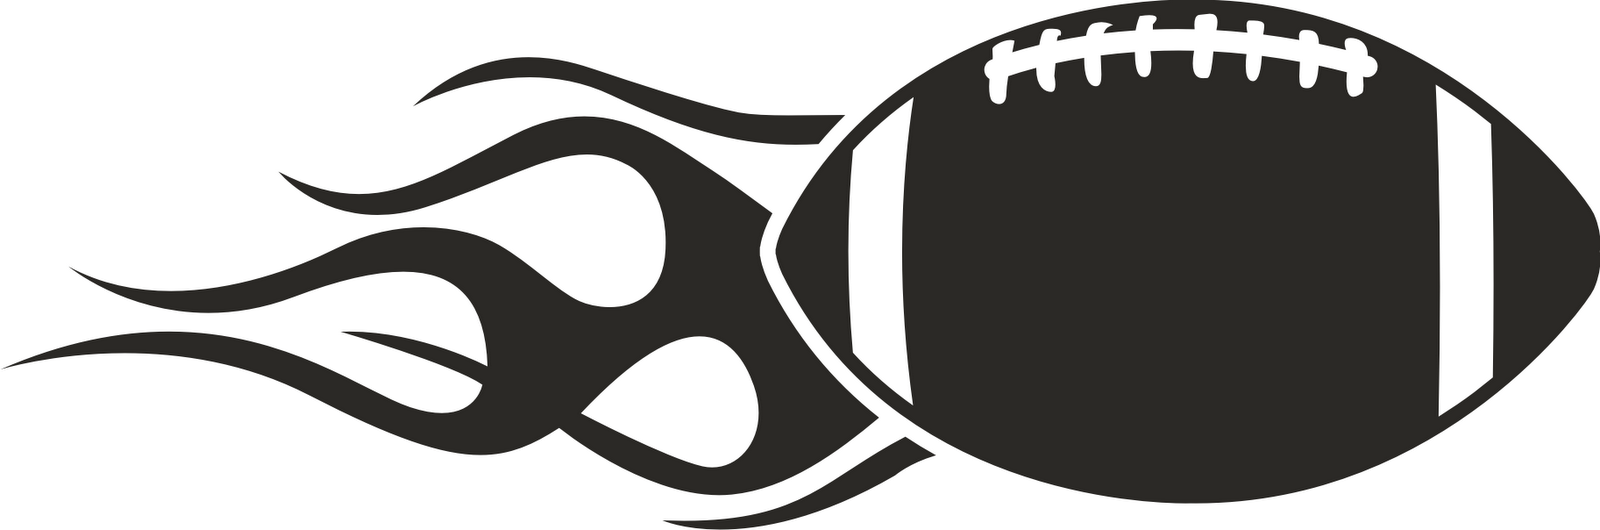 Football Printable Images Clipart Clipart